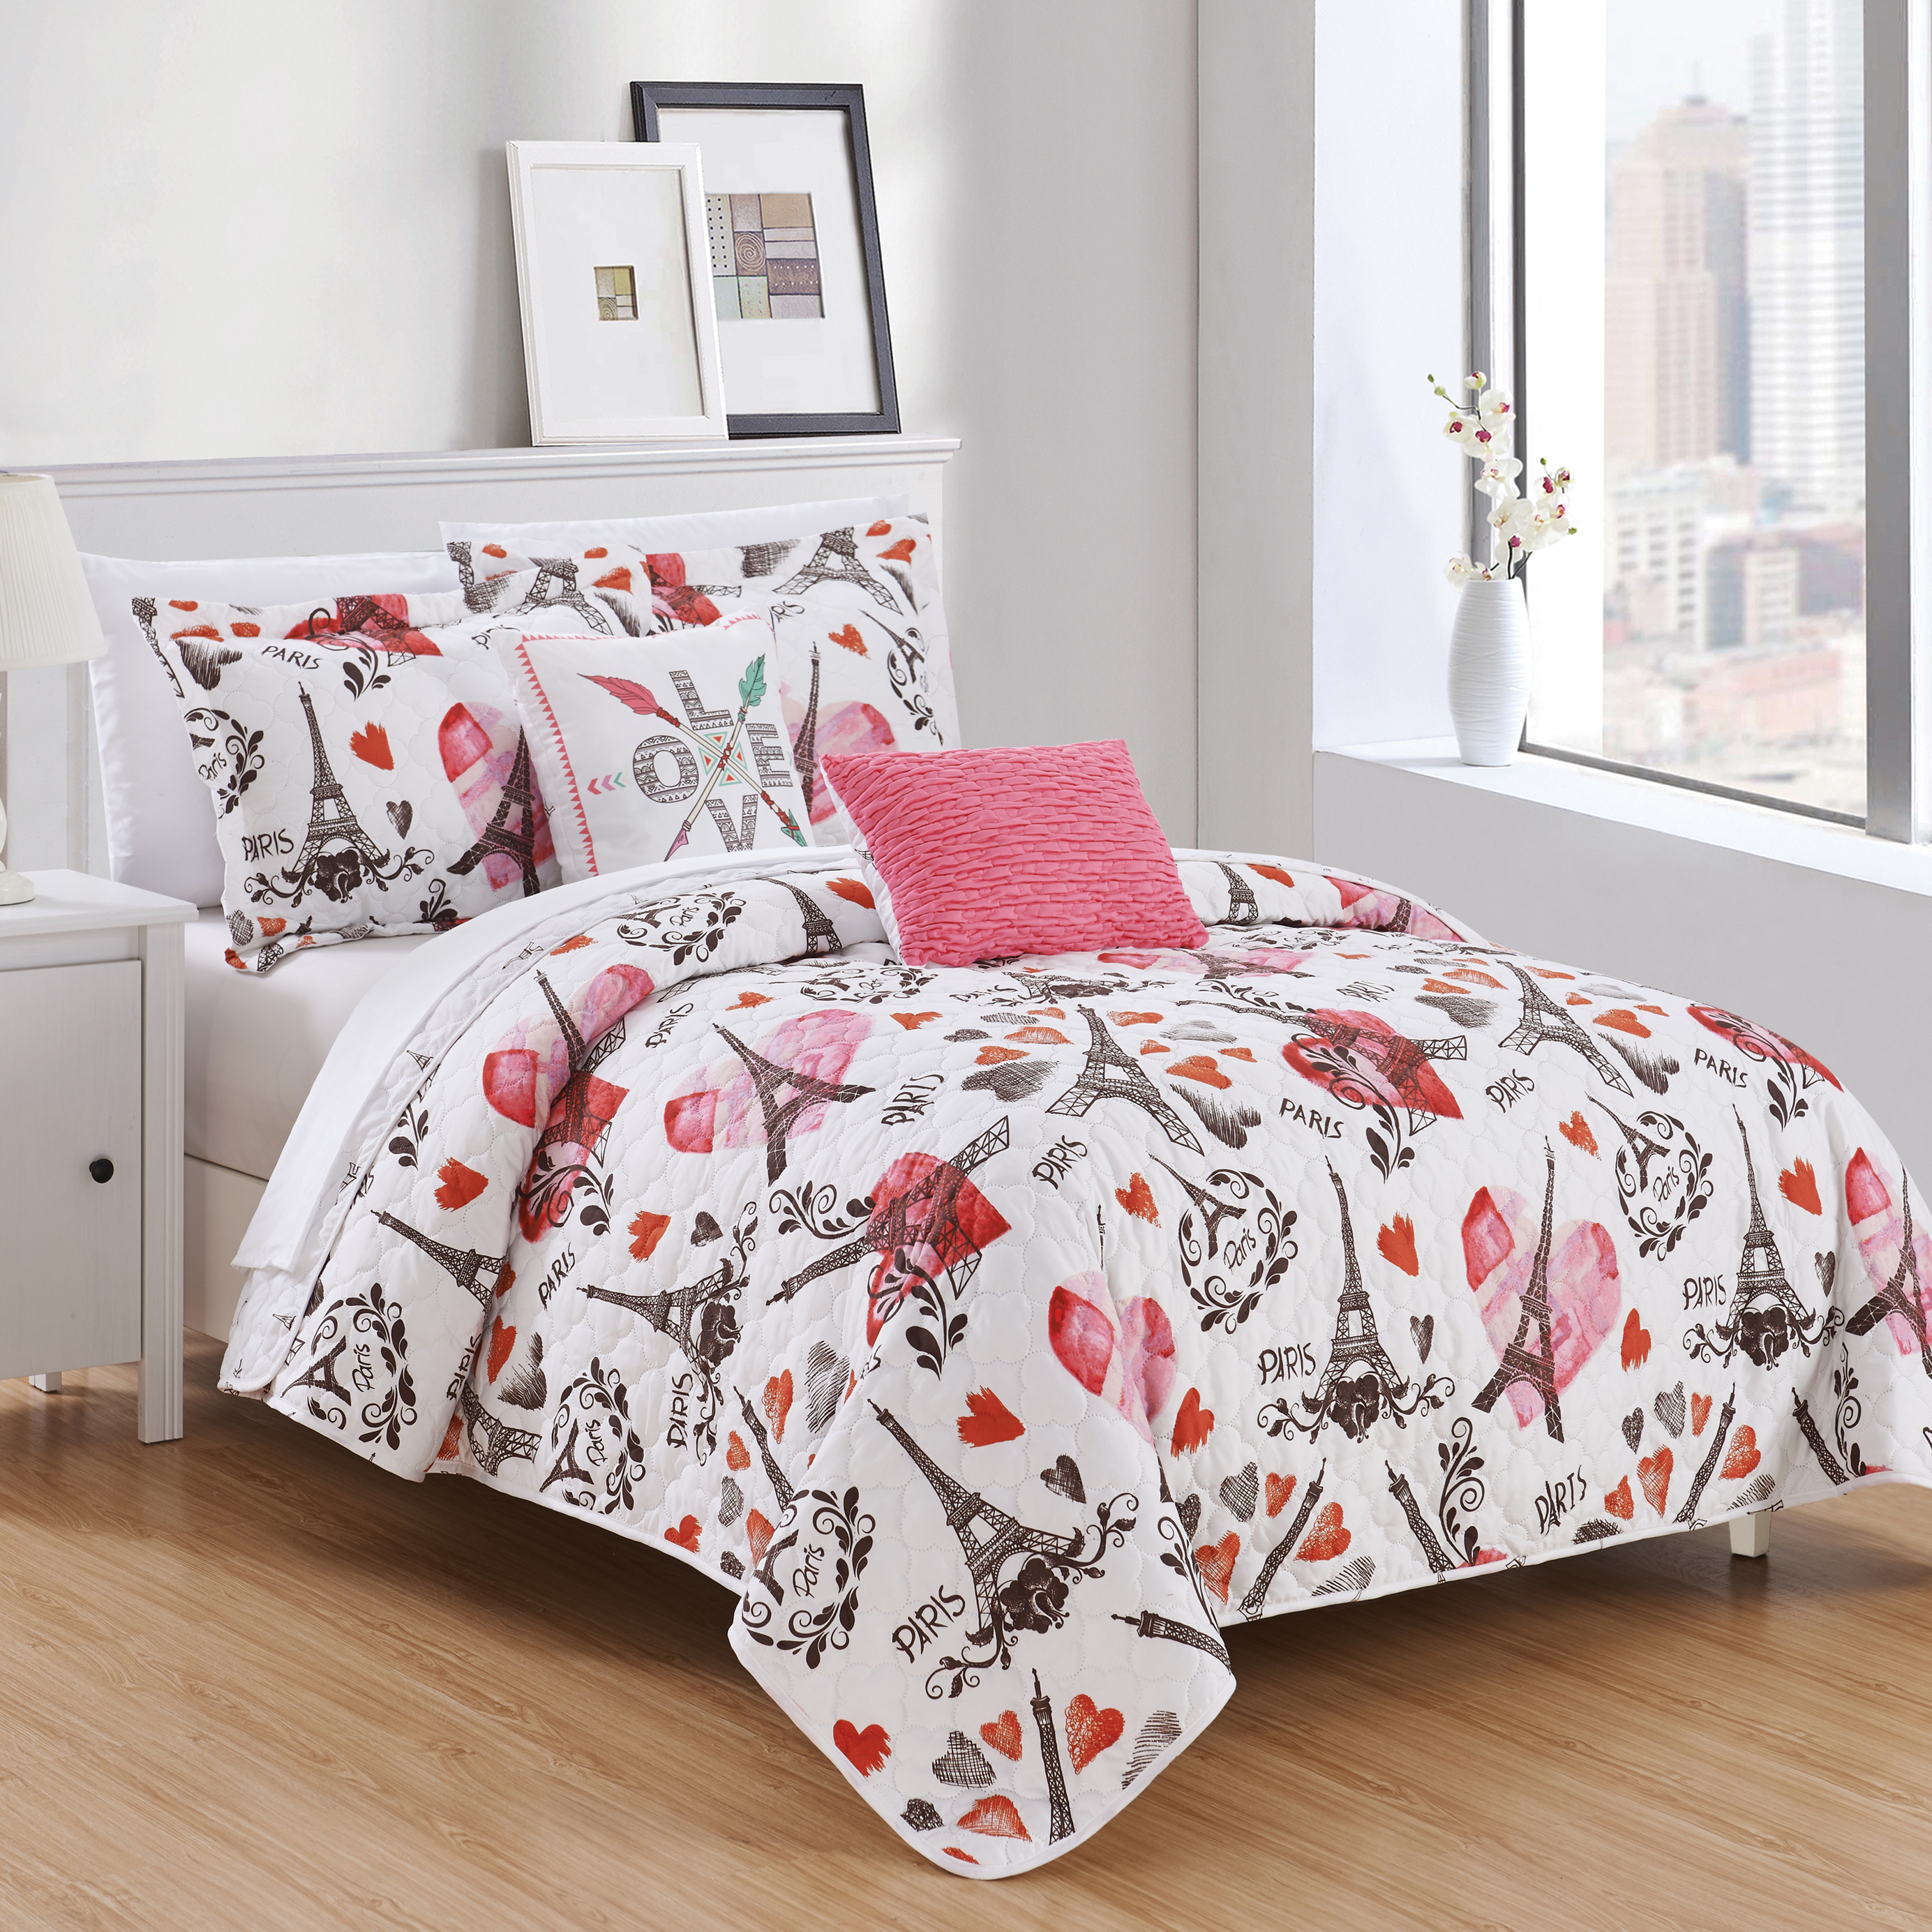 Alphonse 5 Or 4 Piece Reversible Quilt Set Paris Is Love Inspired Printed Design Coverlet Bedding - Pink, Full